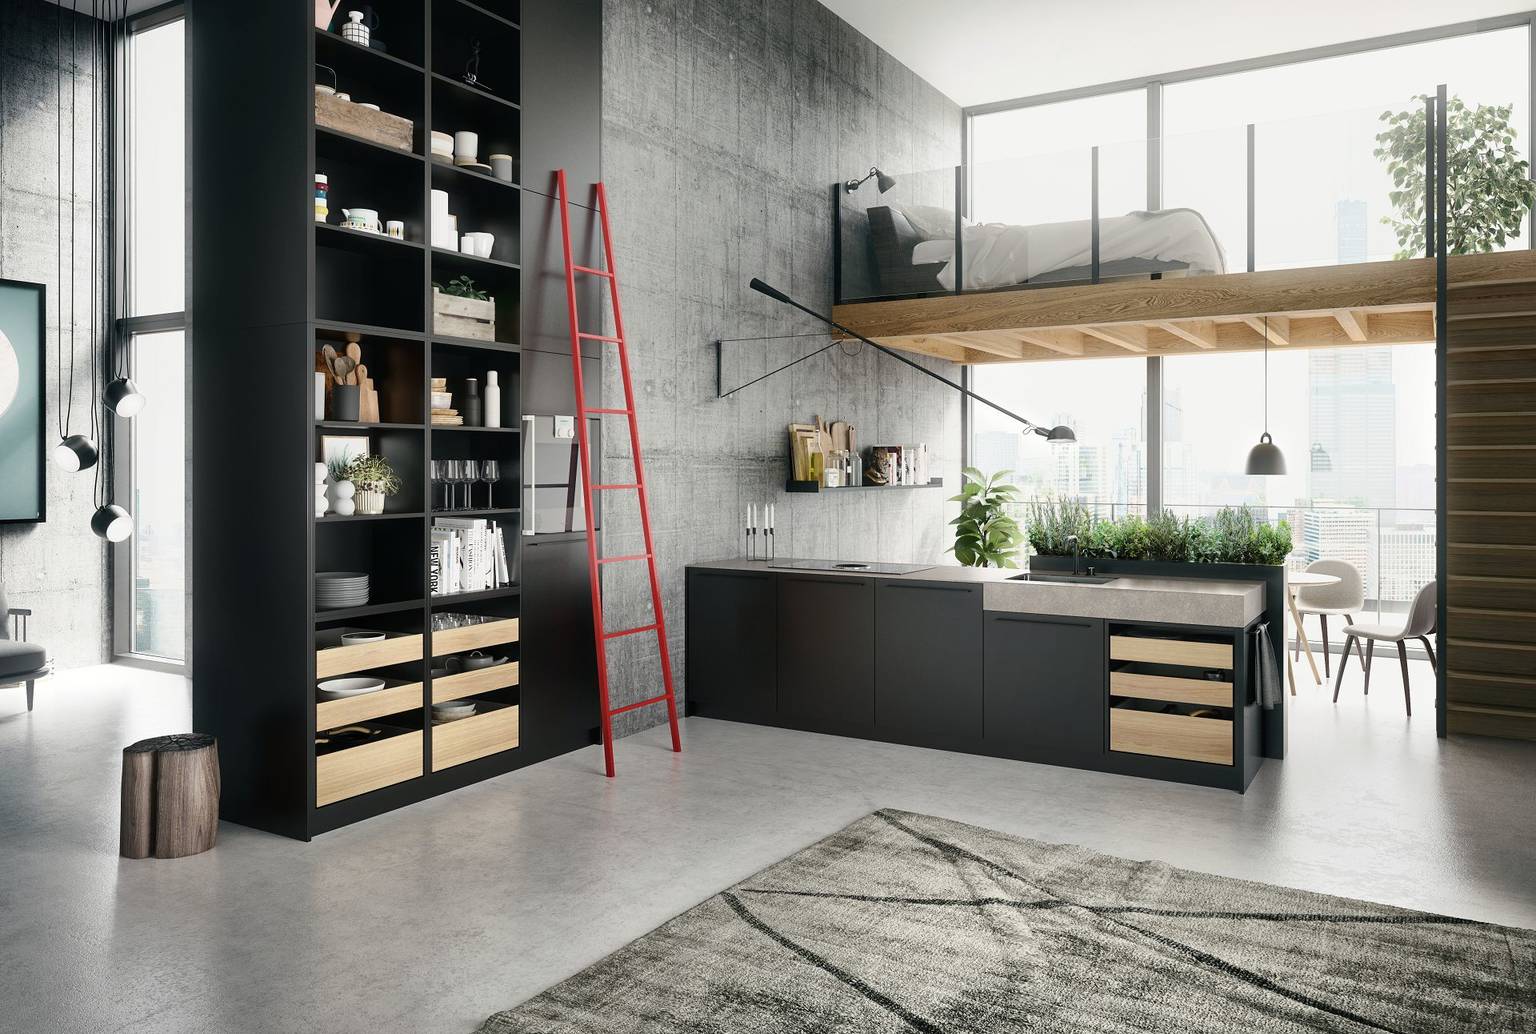 SieMatic Urban SE kitchen in graphite grey with floor-to-ceiling shelving, island and herb garden